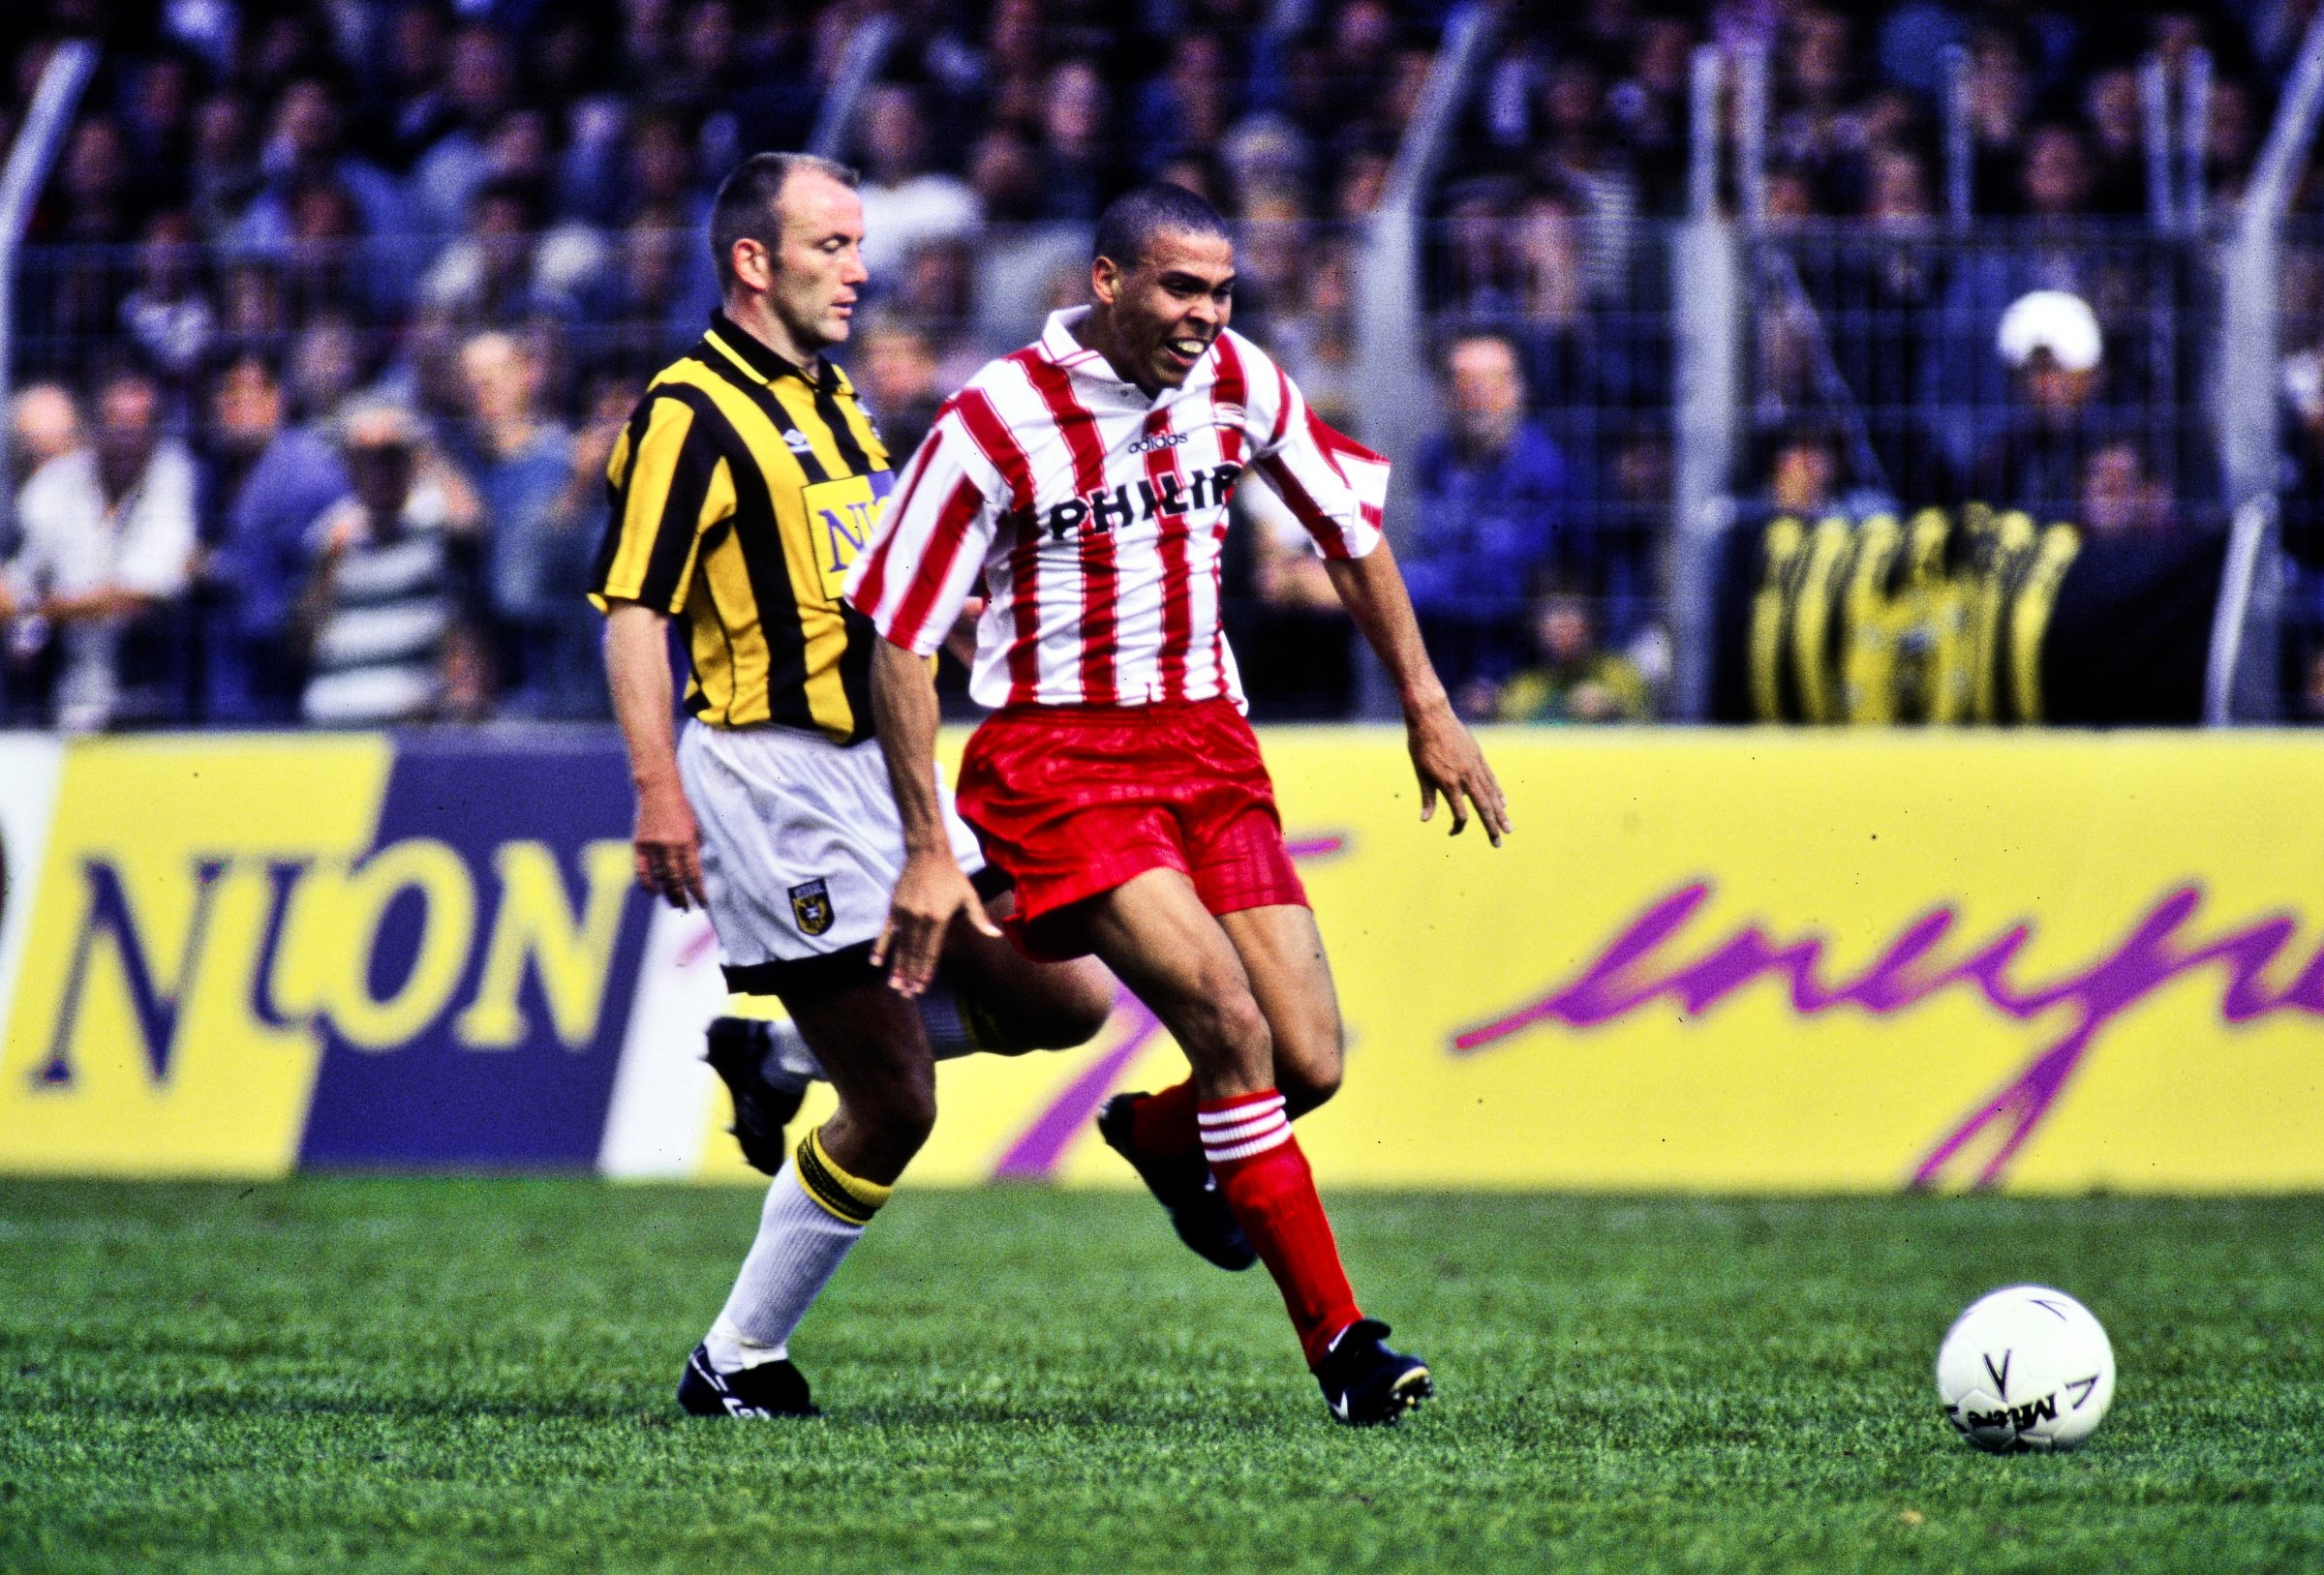 Before joining Barcelona and then Inter, the young Ronaldo played at PSV Eindhoven for two seasons